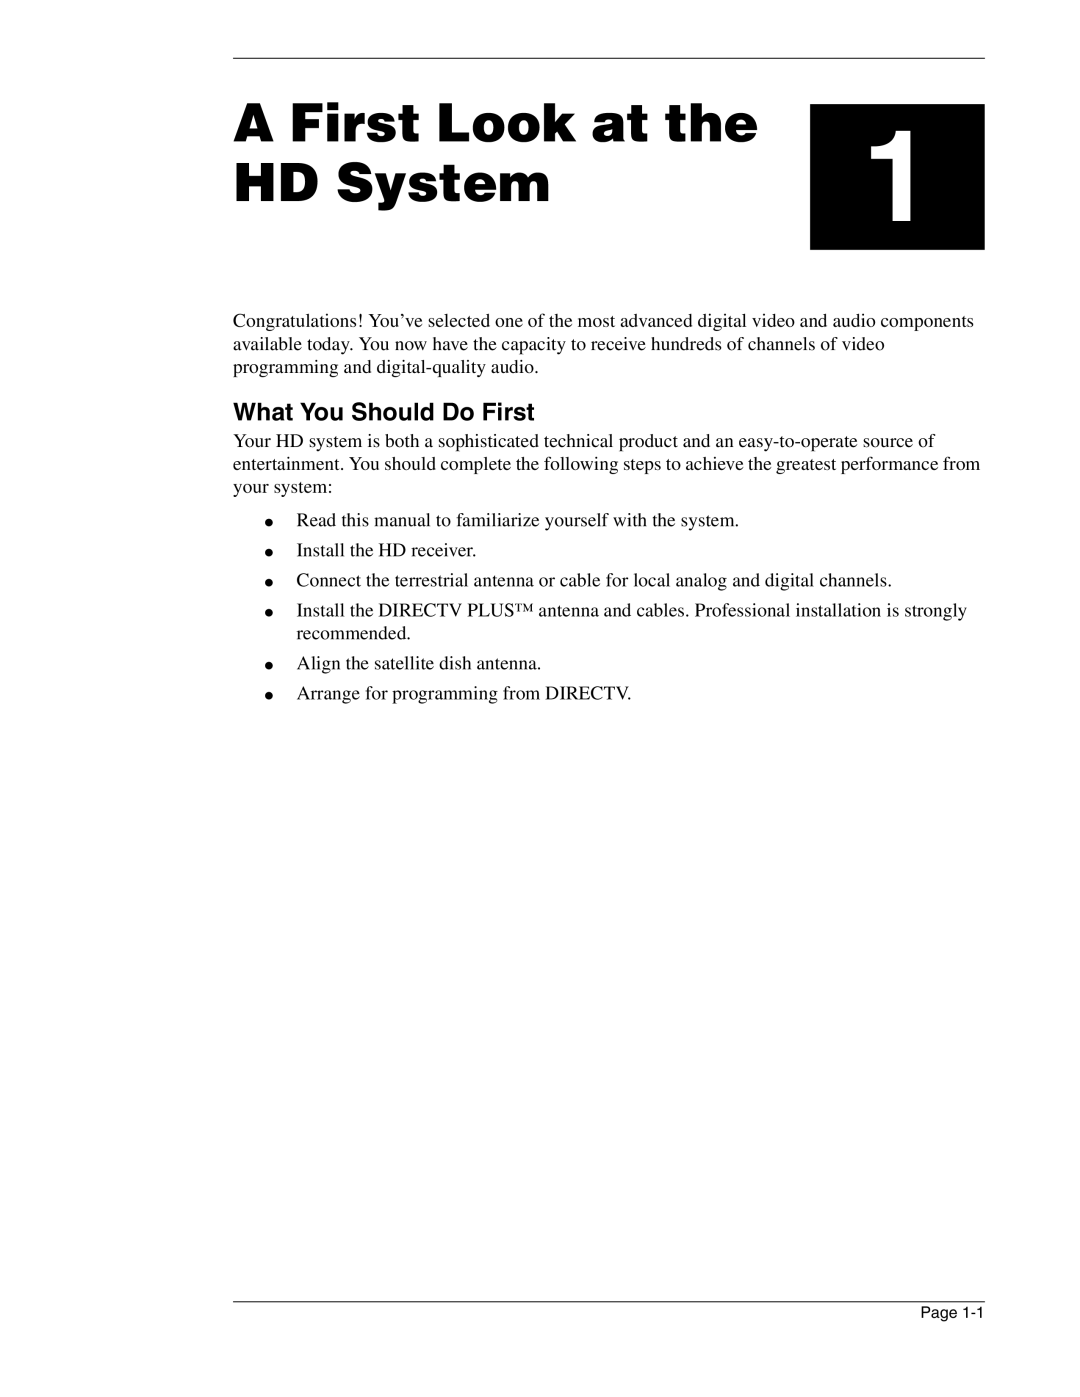 DirecTV HIRD-E86 manual A First Look at the, HD System, What You Should Do First 